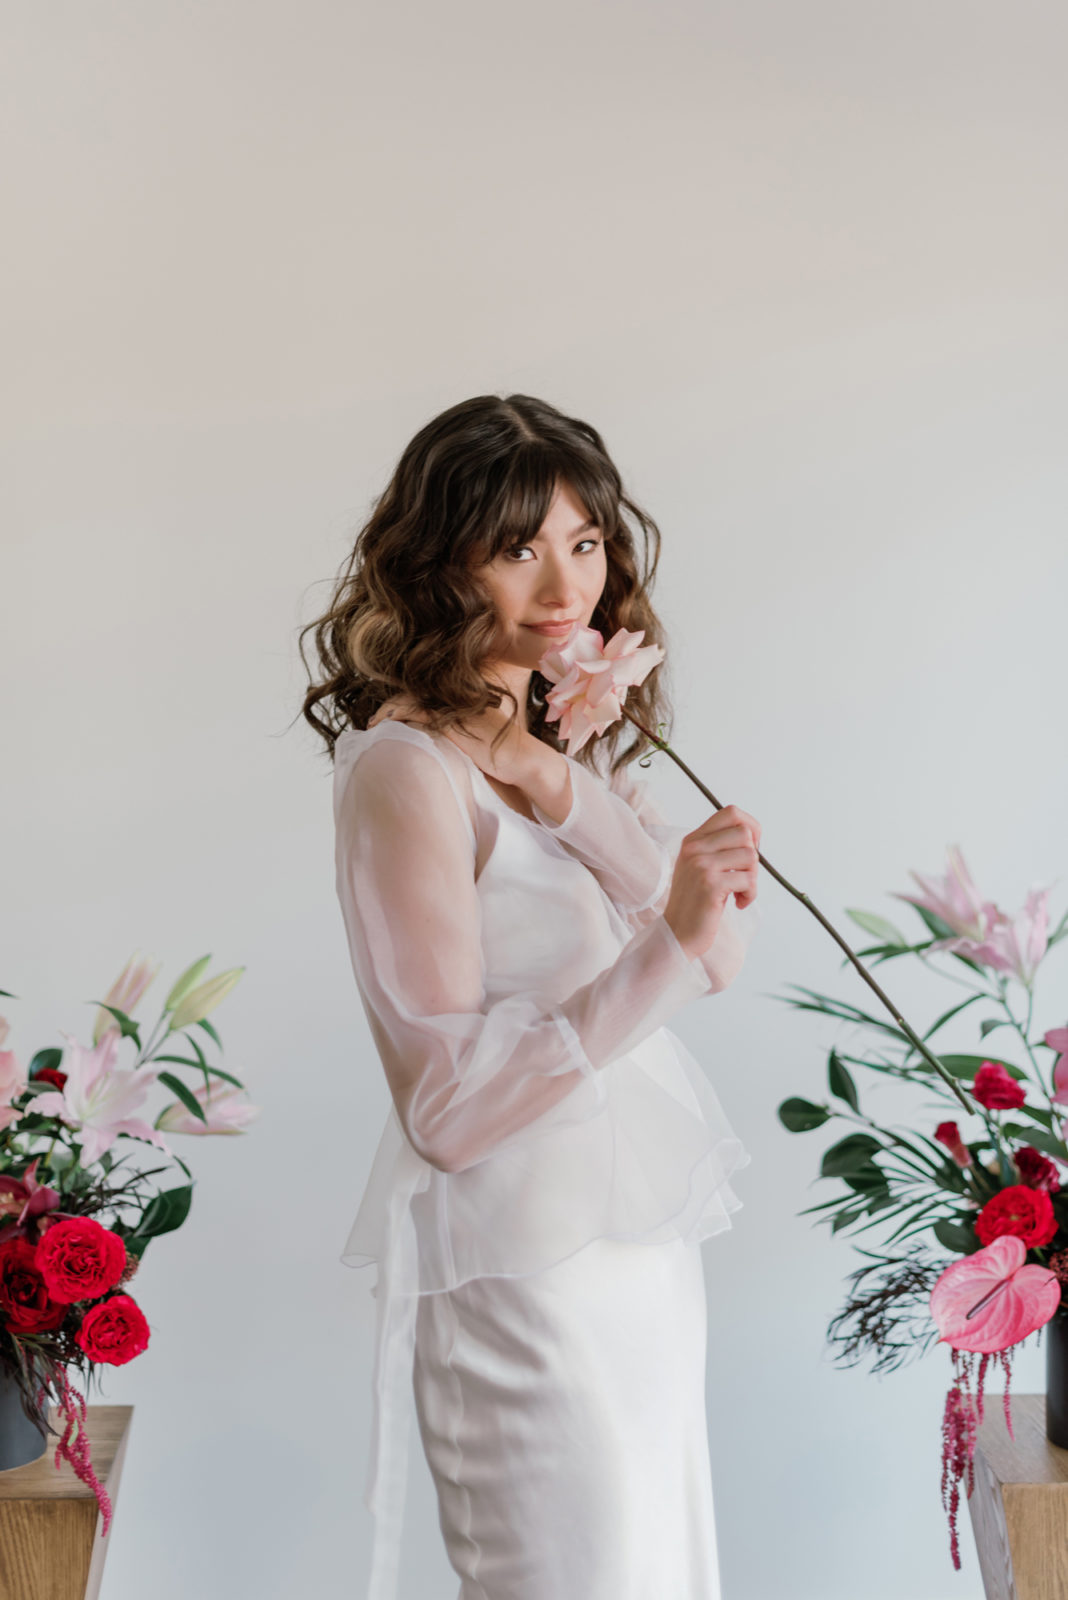 Bride with romantic wavy hair poses with a garden rose for this modern microwedding inspiration